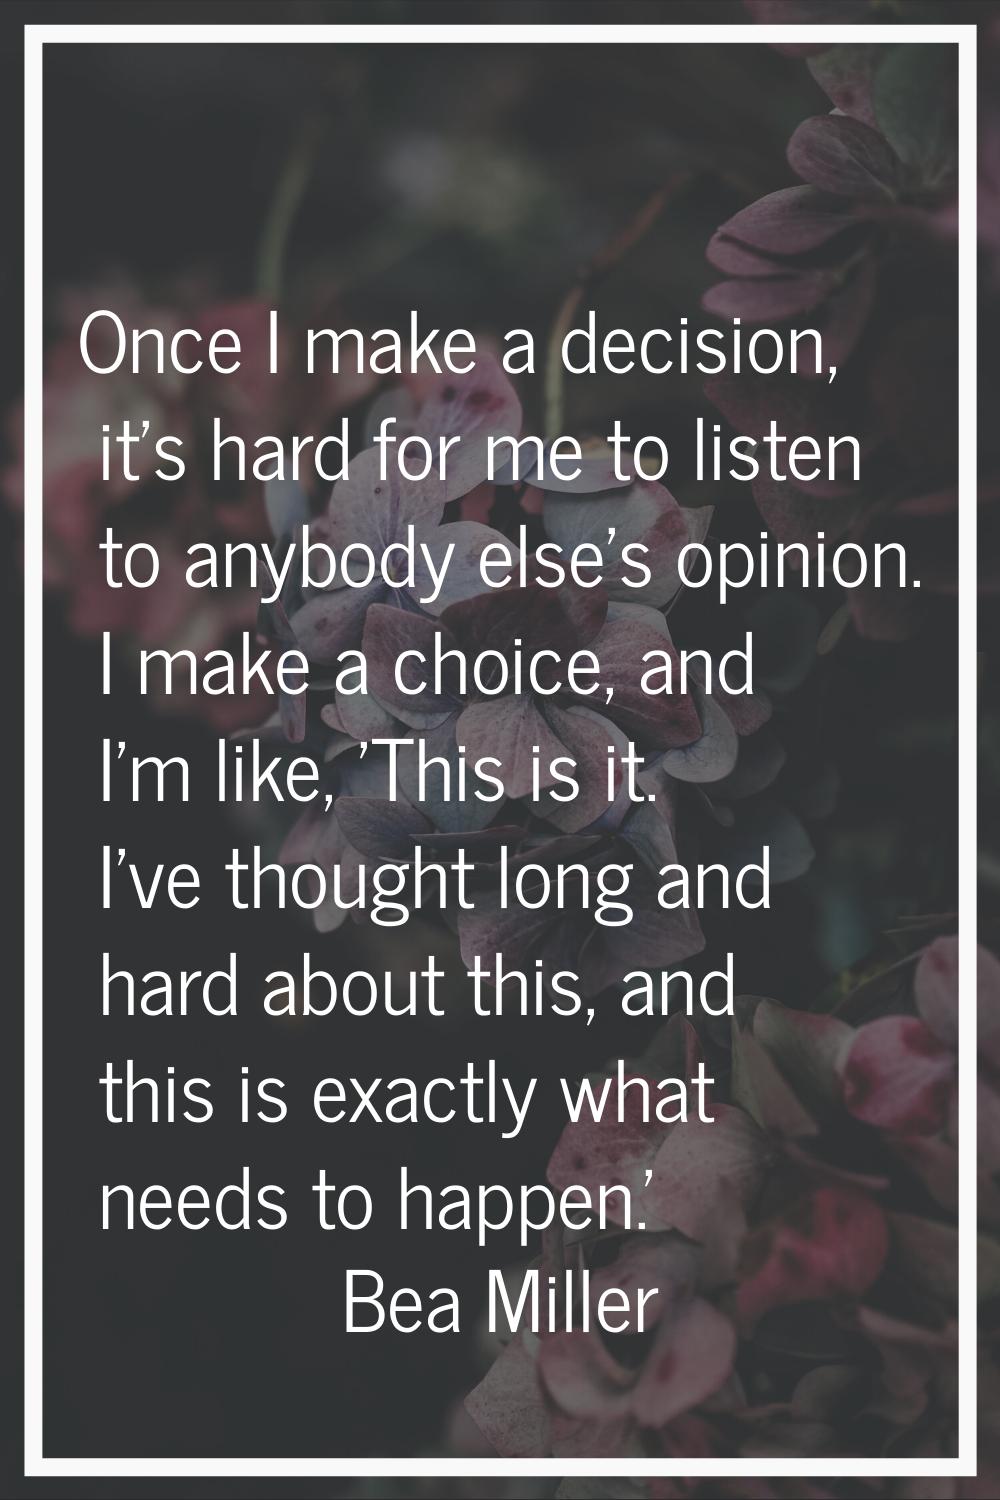 Once I make a decision, it's hard for me to listen to anybody else's opinion. I make a choice, and 